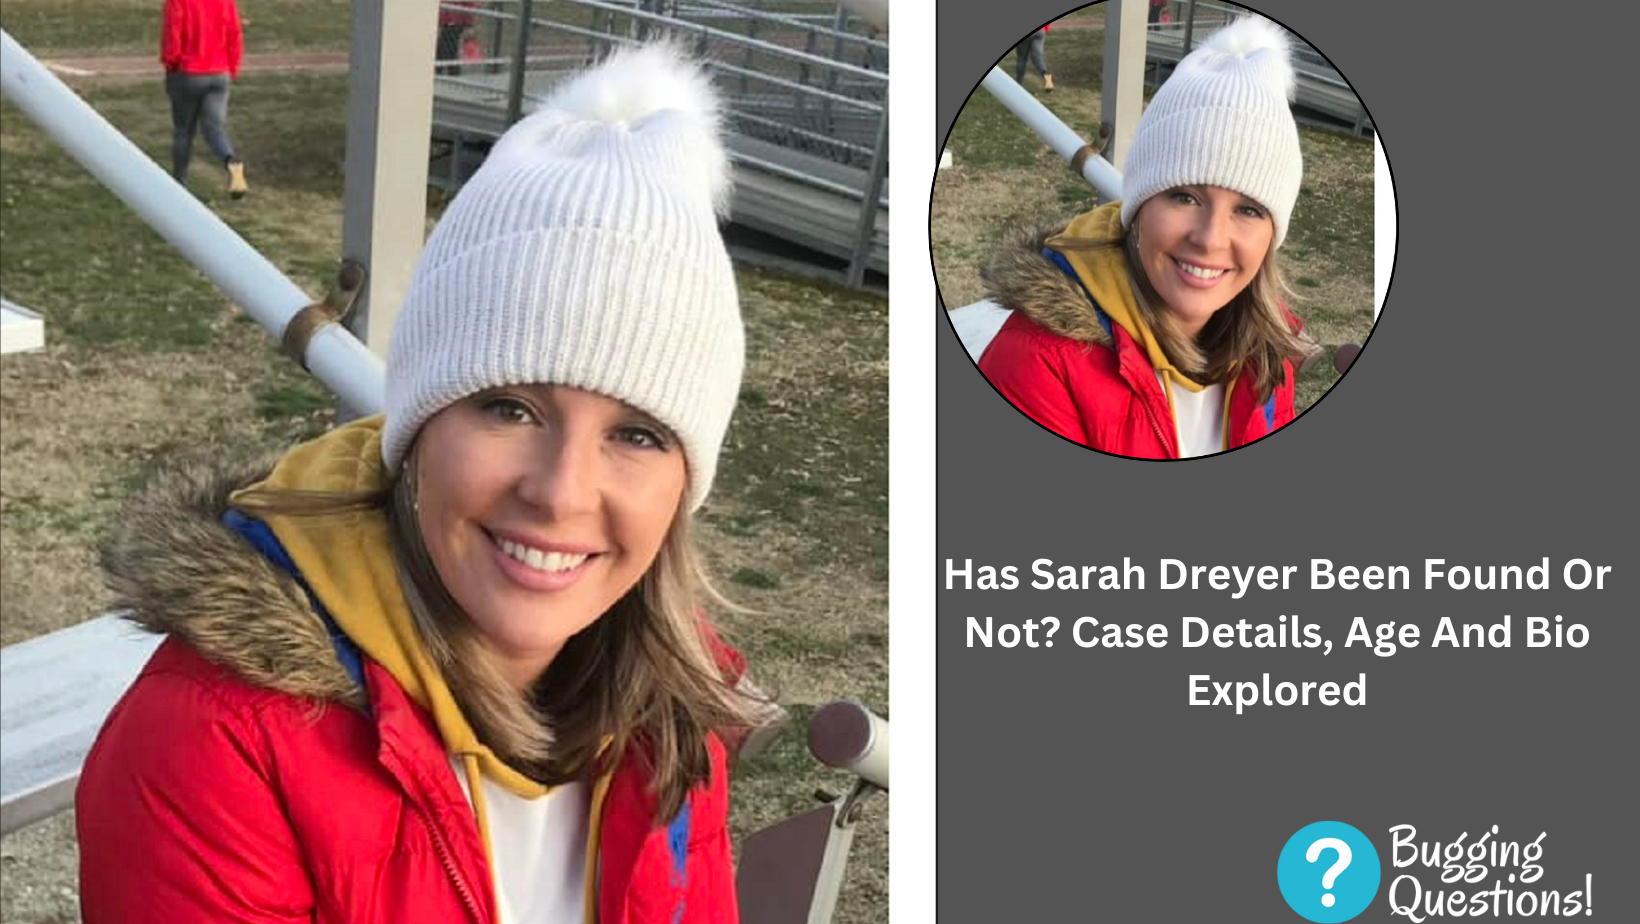 Has Sarah Dreyer Been Found Or Not?